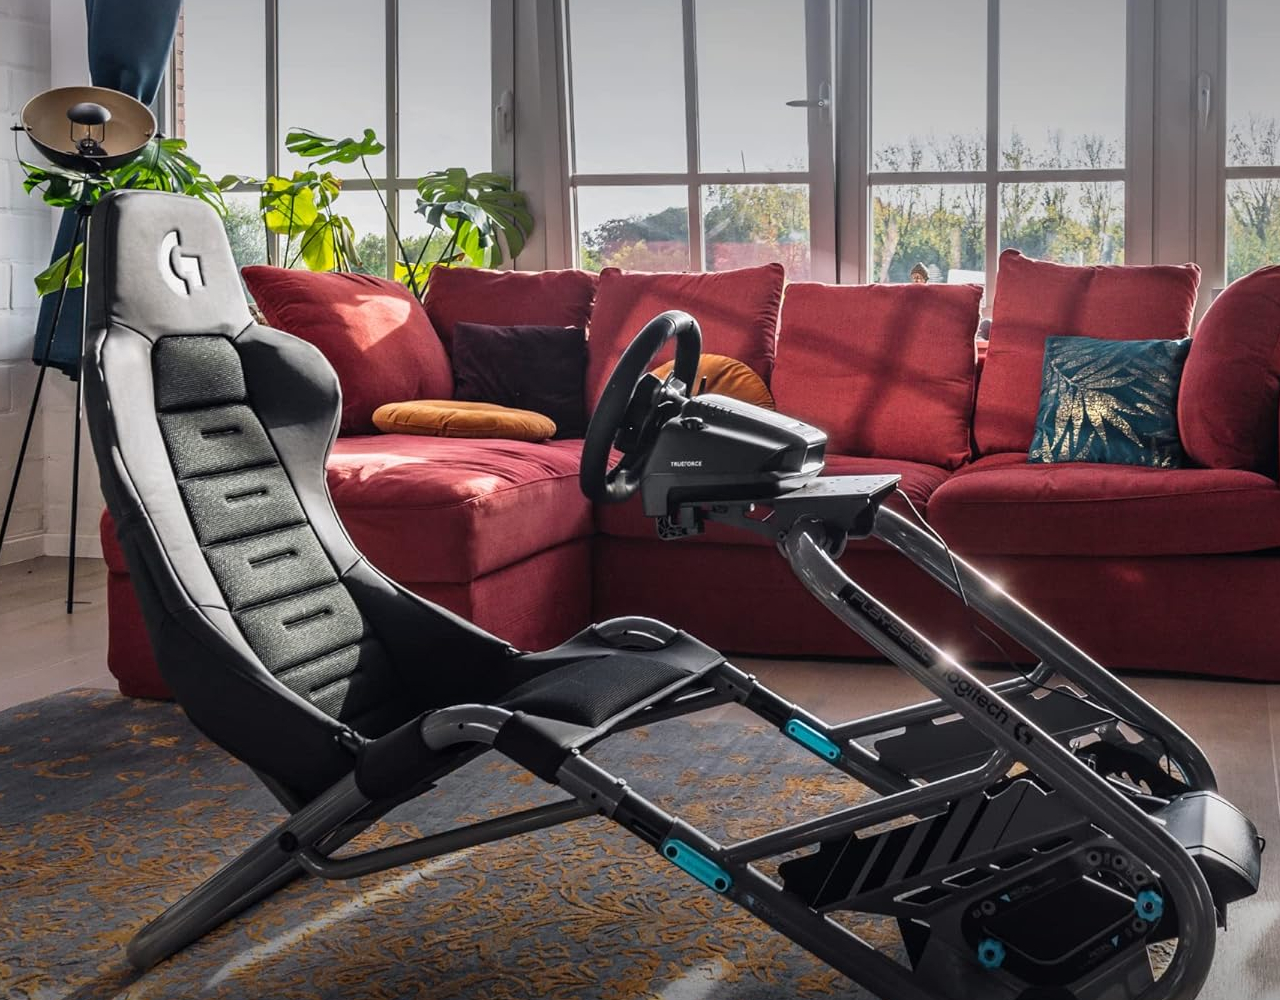 The Must-Have Gaming Room Accessories